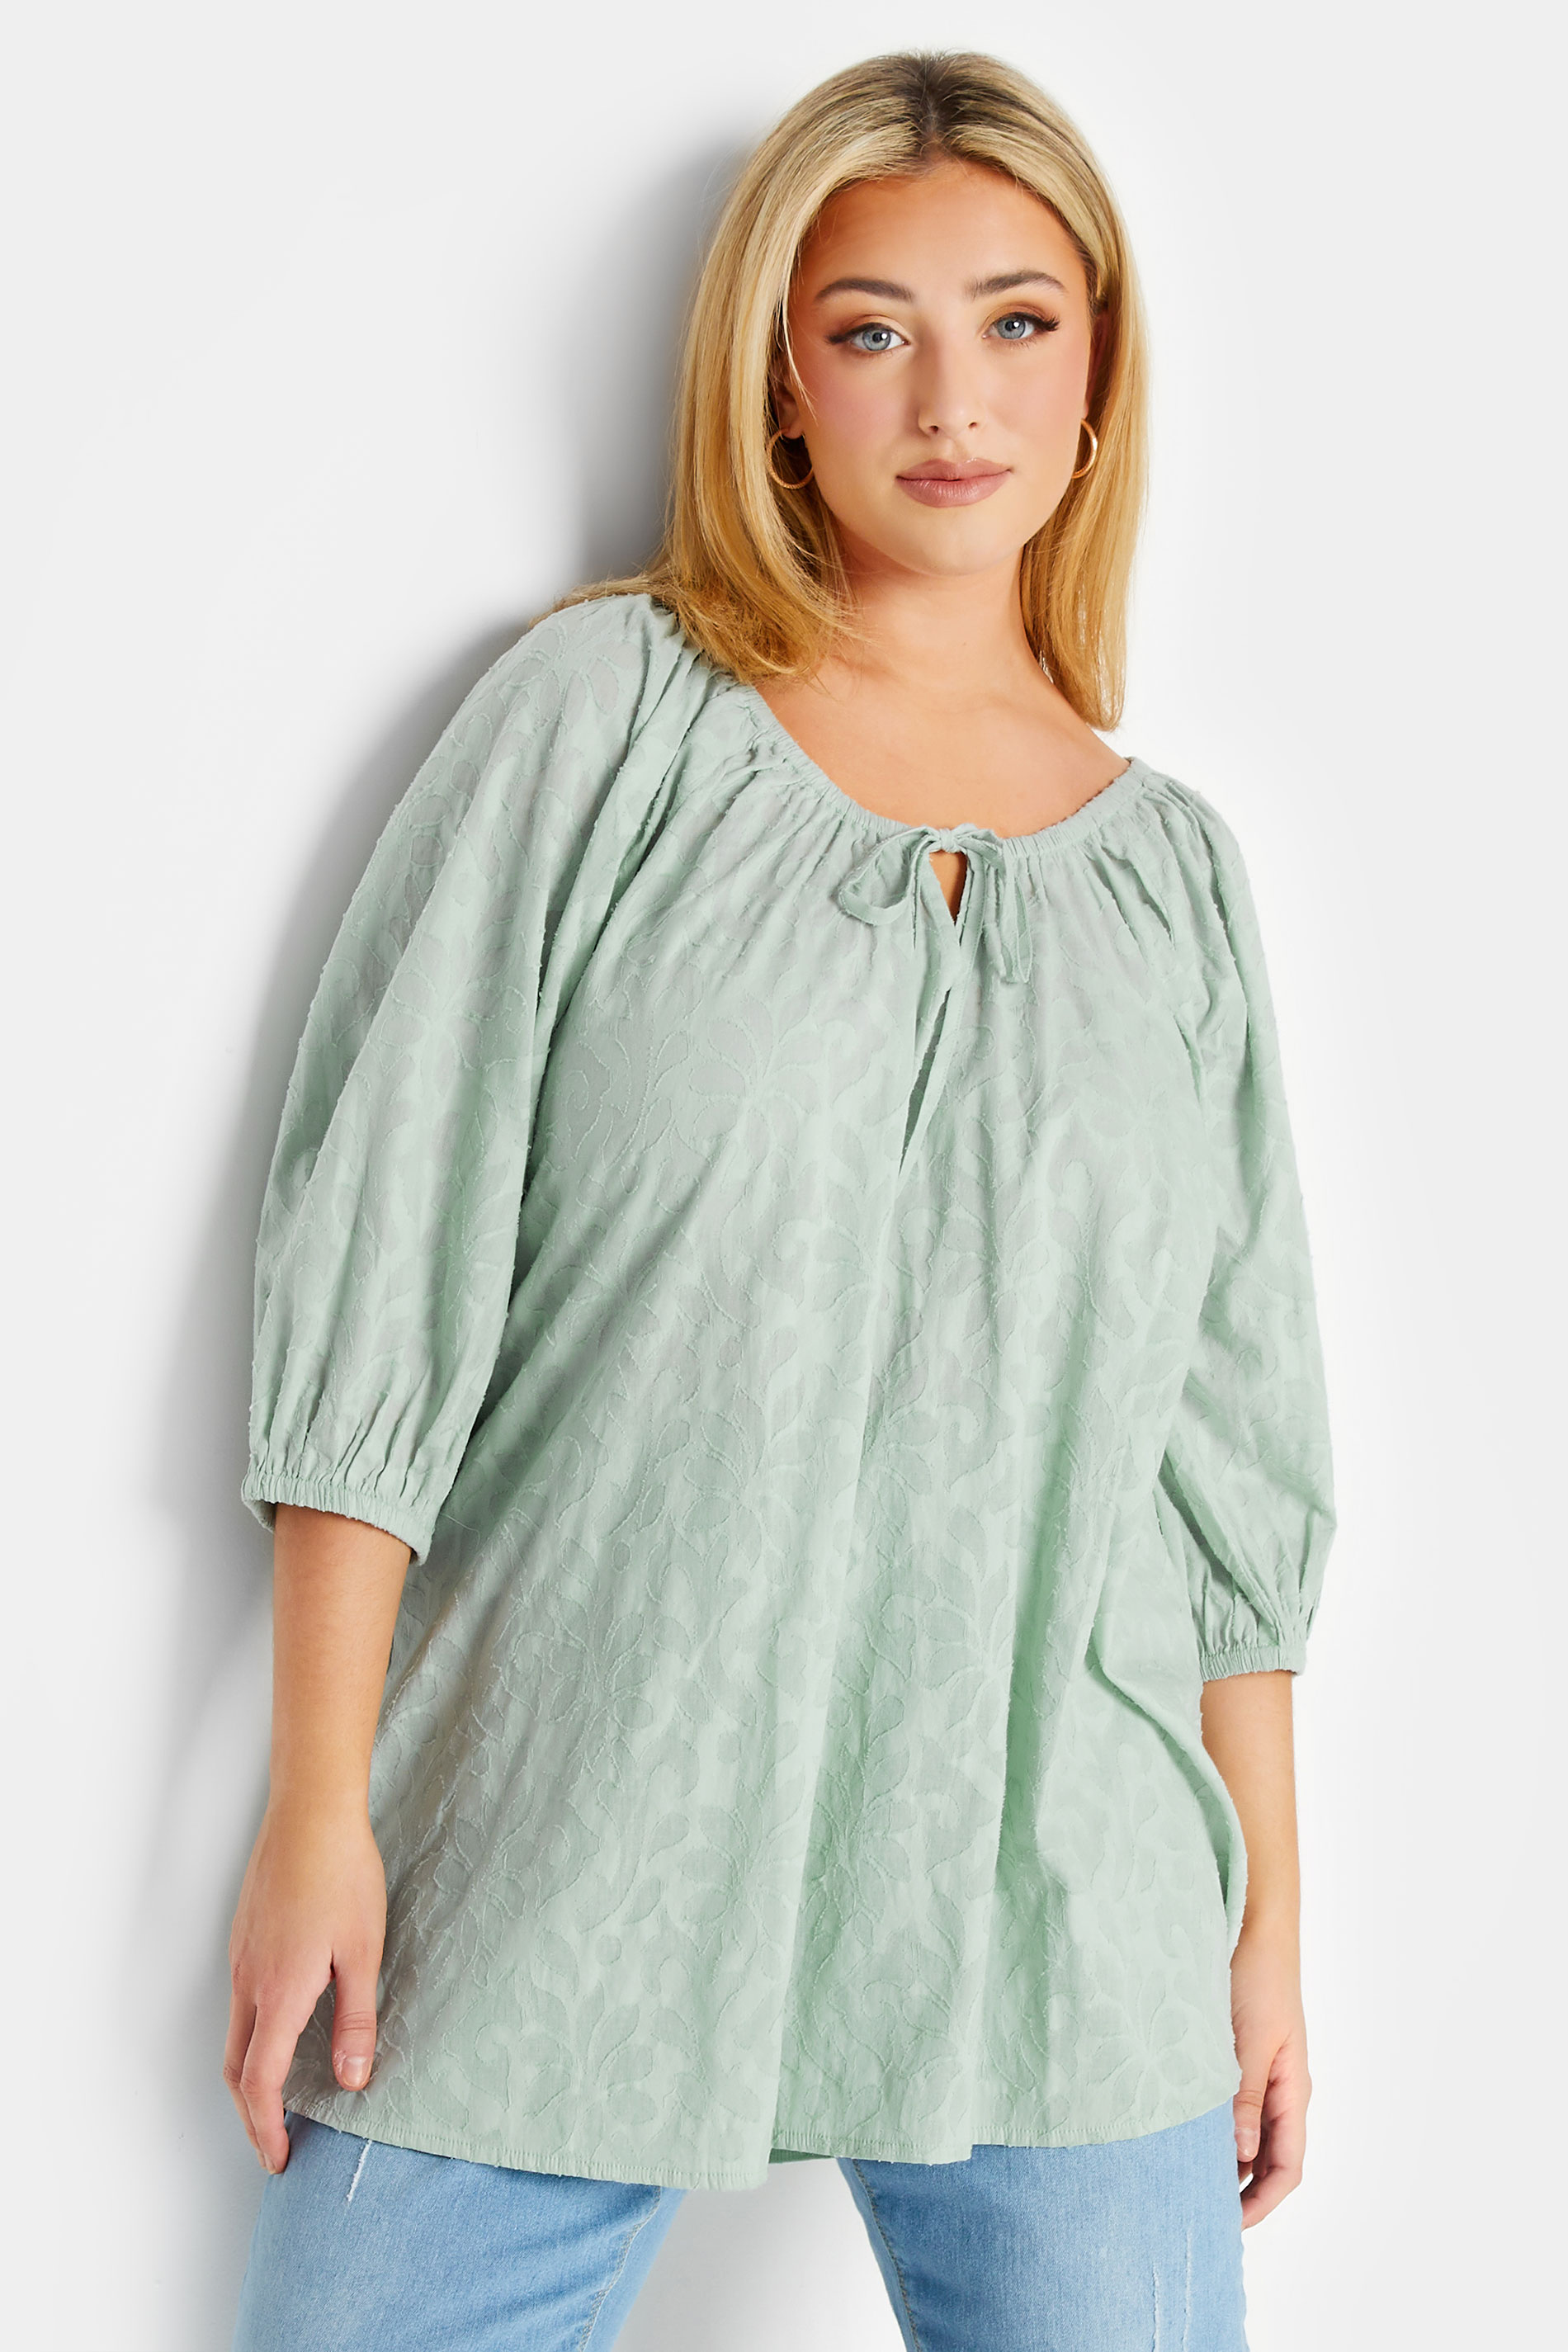 YOURS Plus Size Curve Mint Green Gypsy Textured Top 1